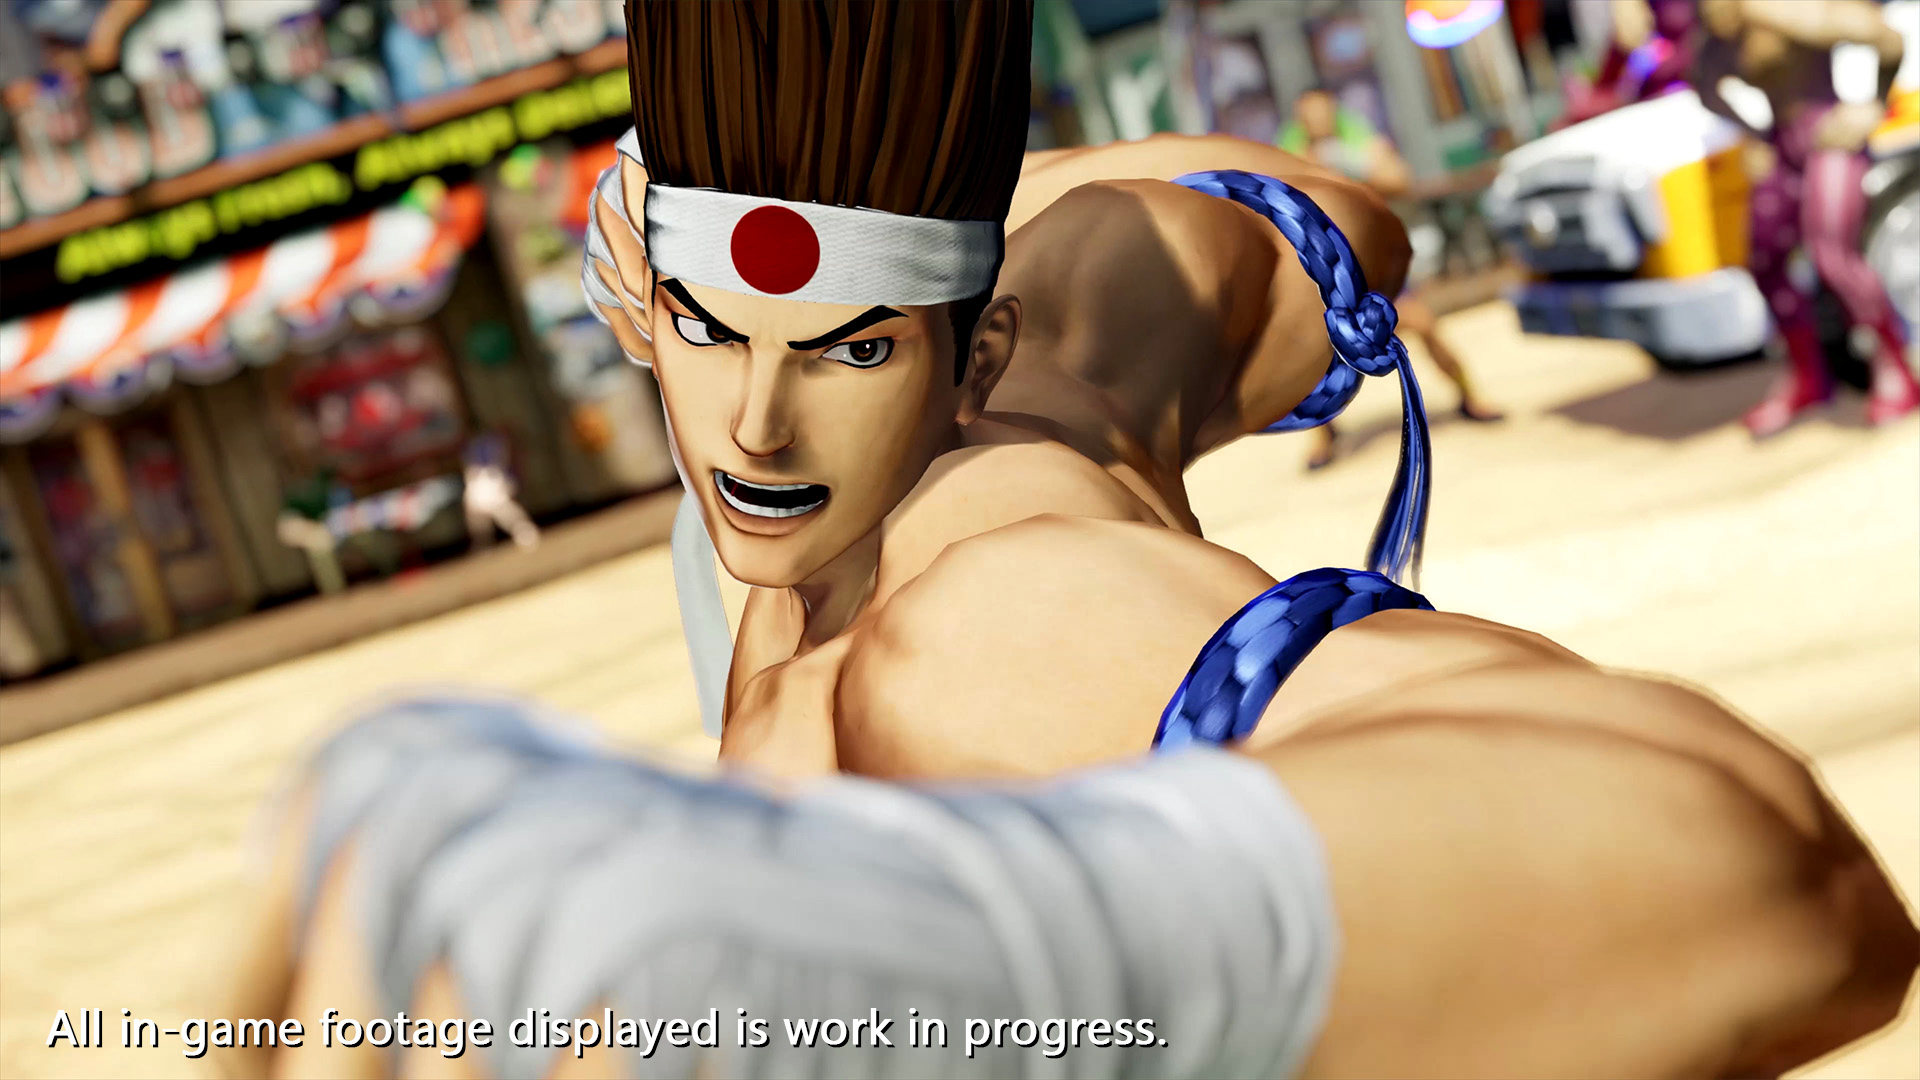 Next Fatal Fury – New Teaser Confirms Joe Higashi, Andy and Terry